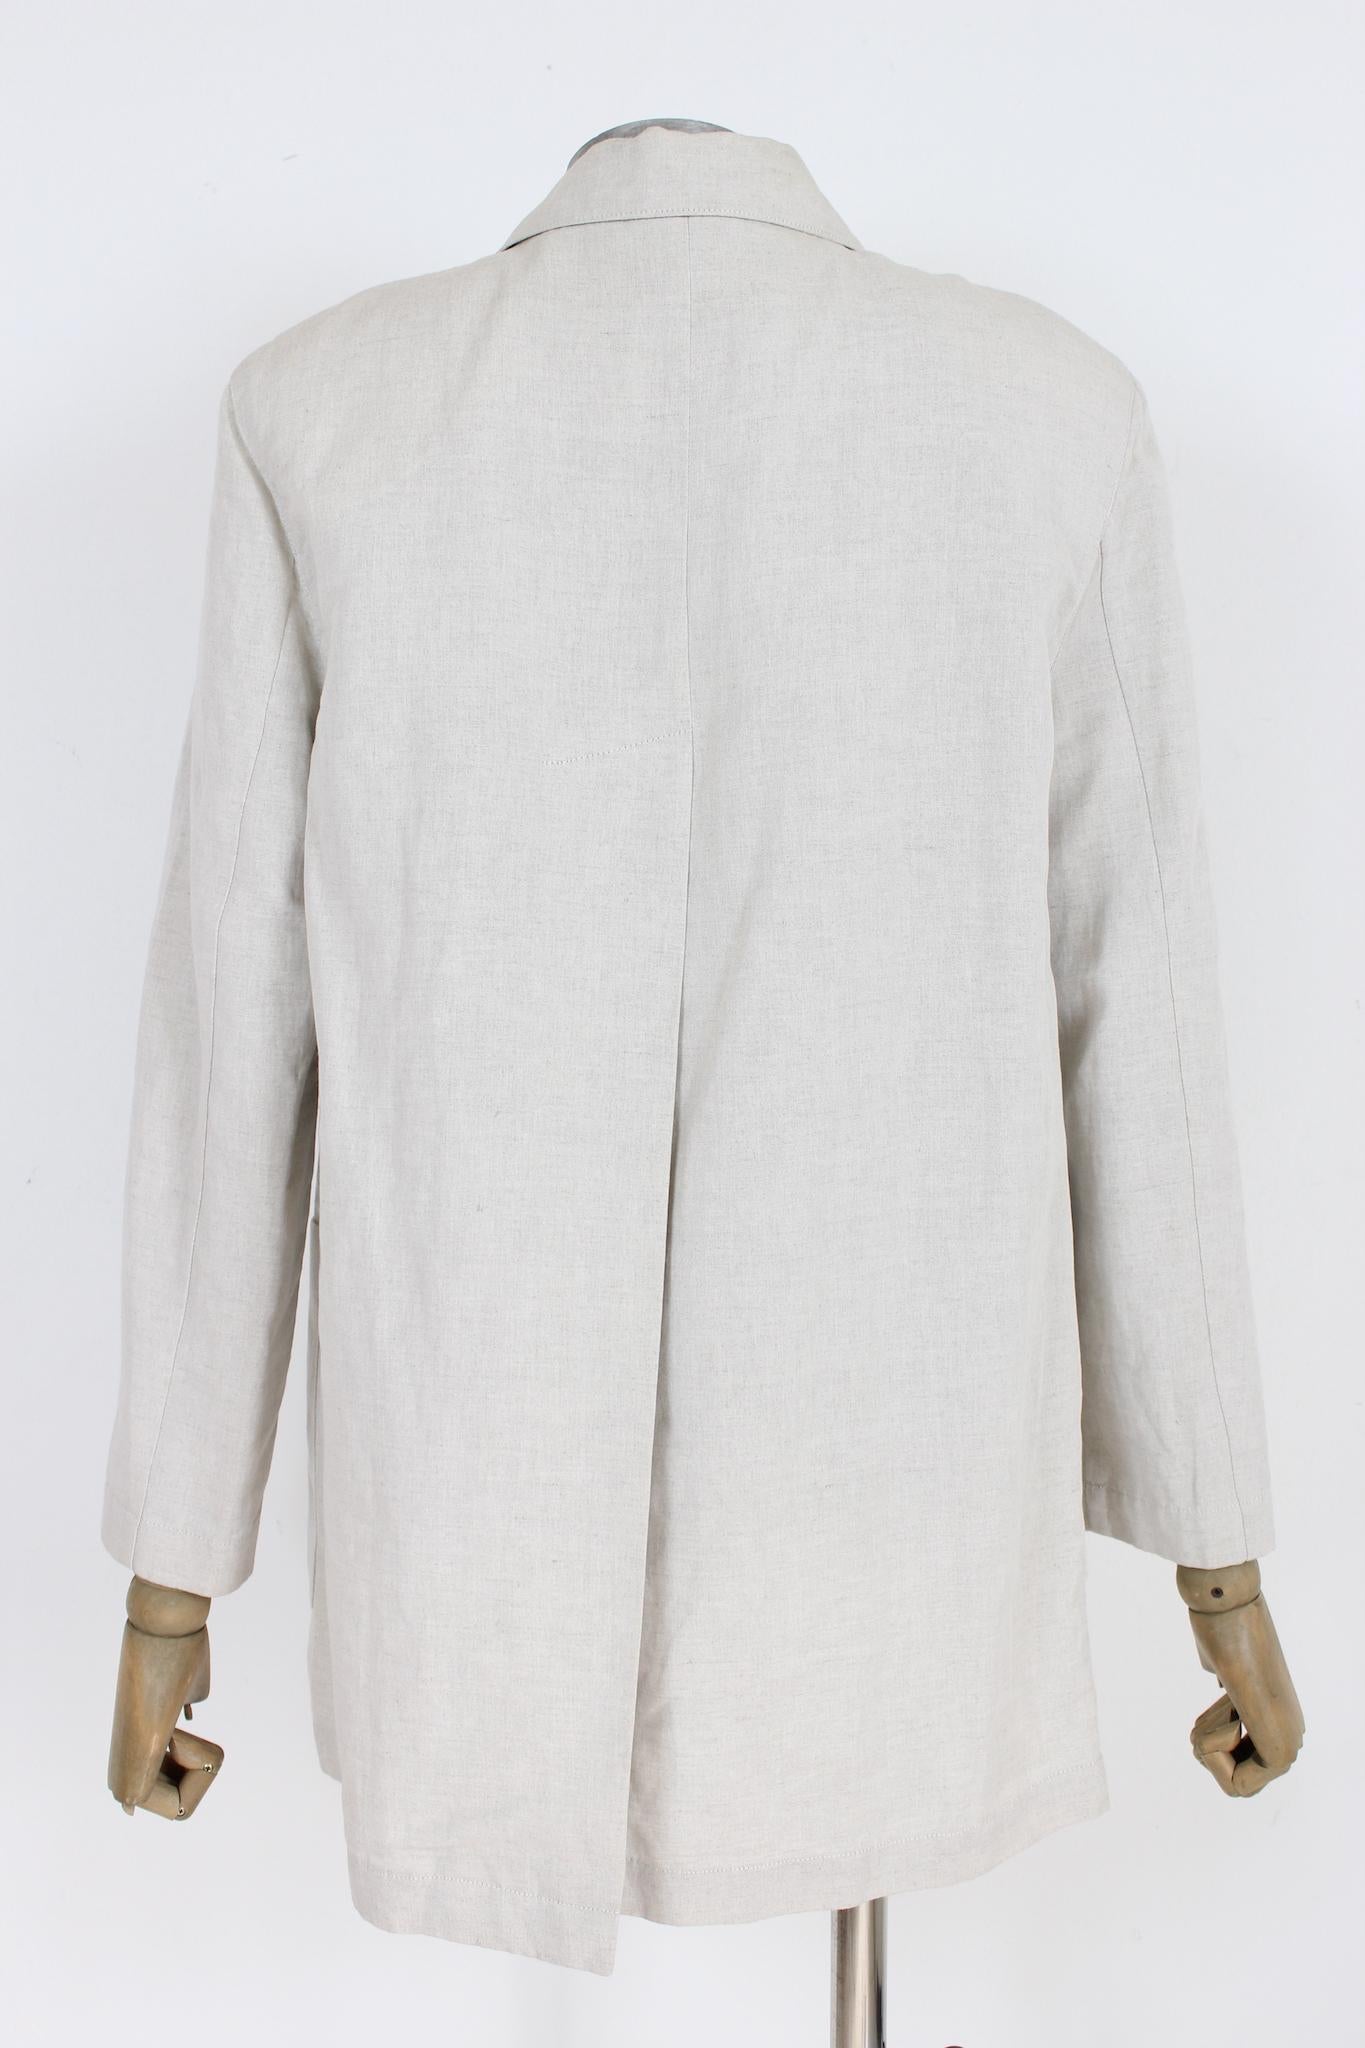 This vintage Byblos jacket is the perfect blend of style and comfort. The slim fit design and linen fabric make it perfect for any casual occasion, while the double vent and shoulder pads add a touch of elegance. The beige color is versatile and can